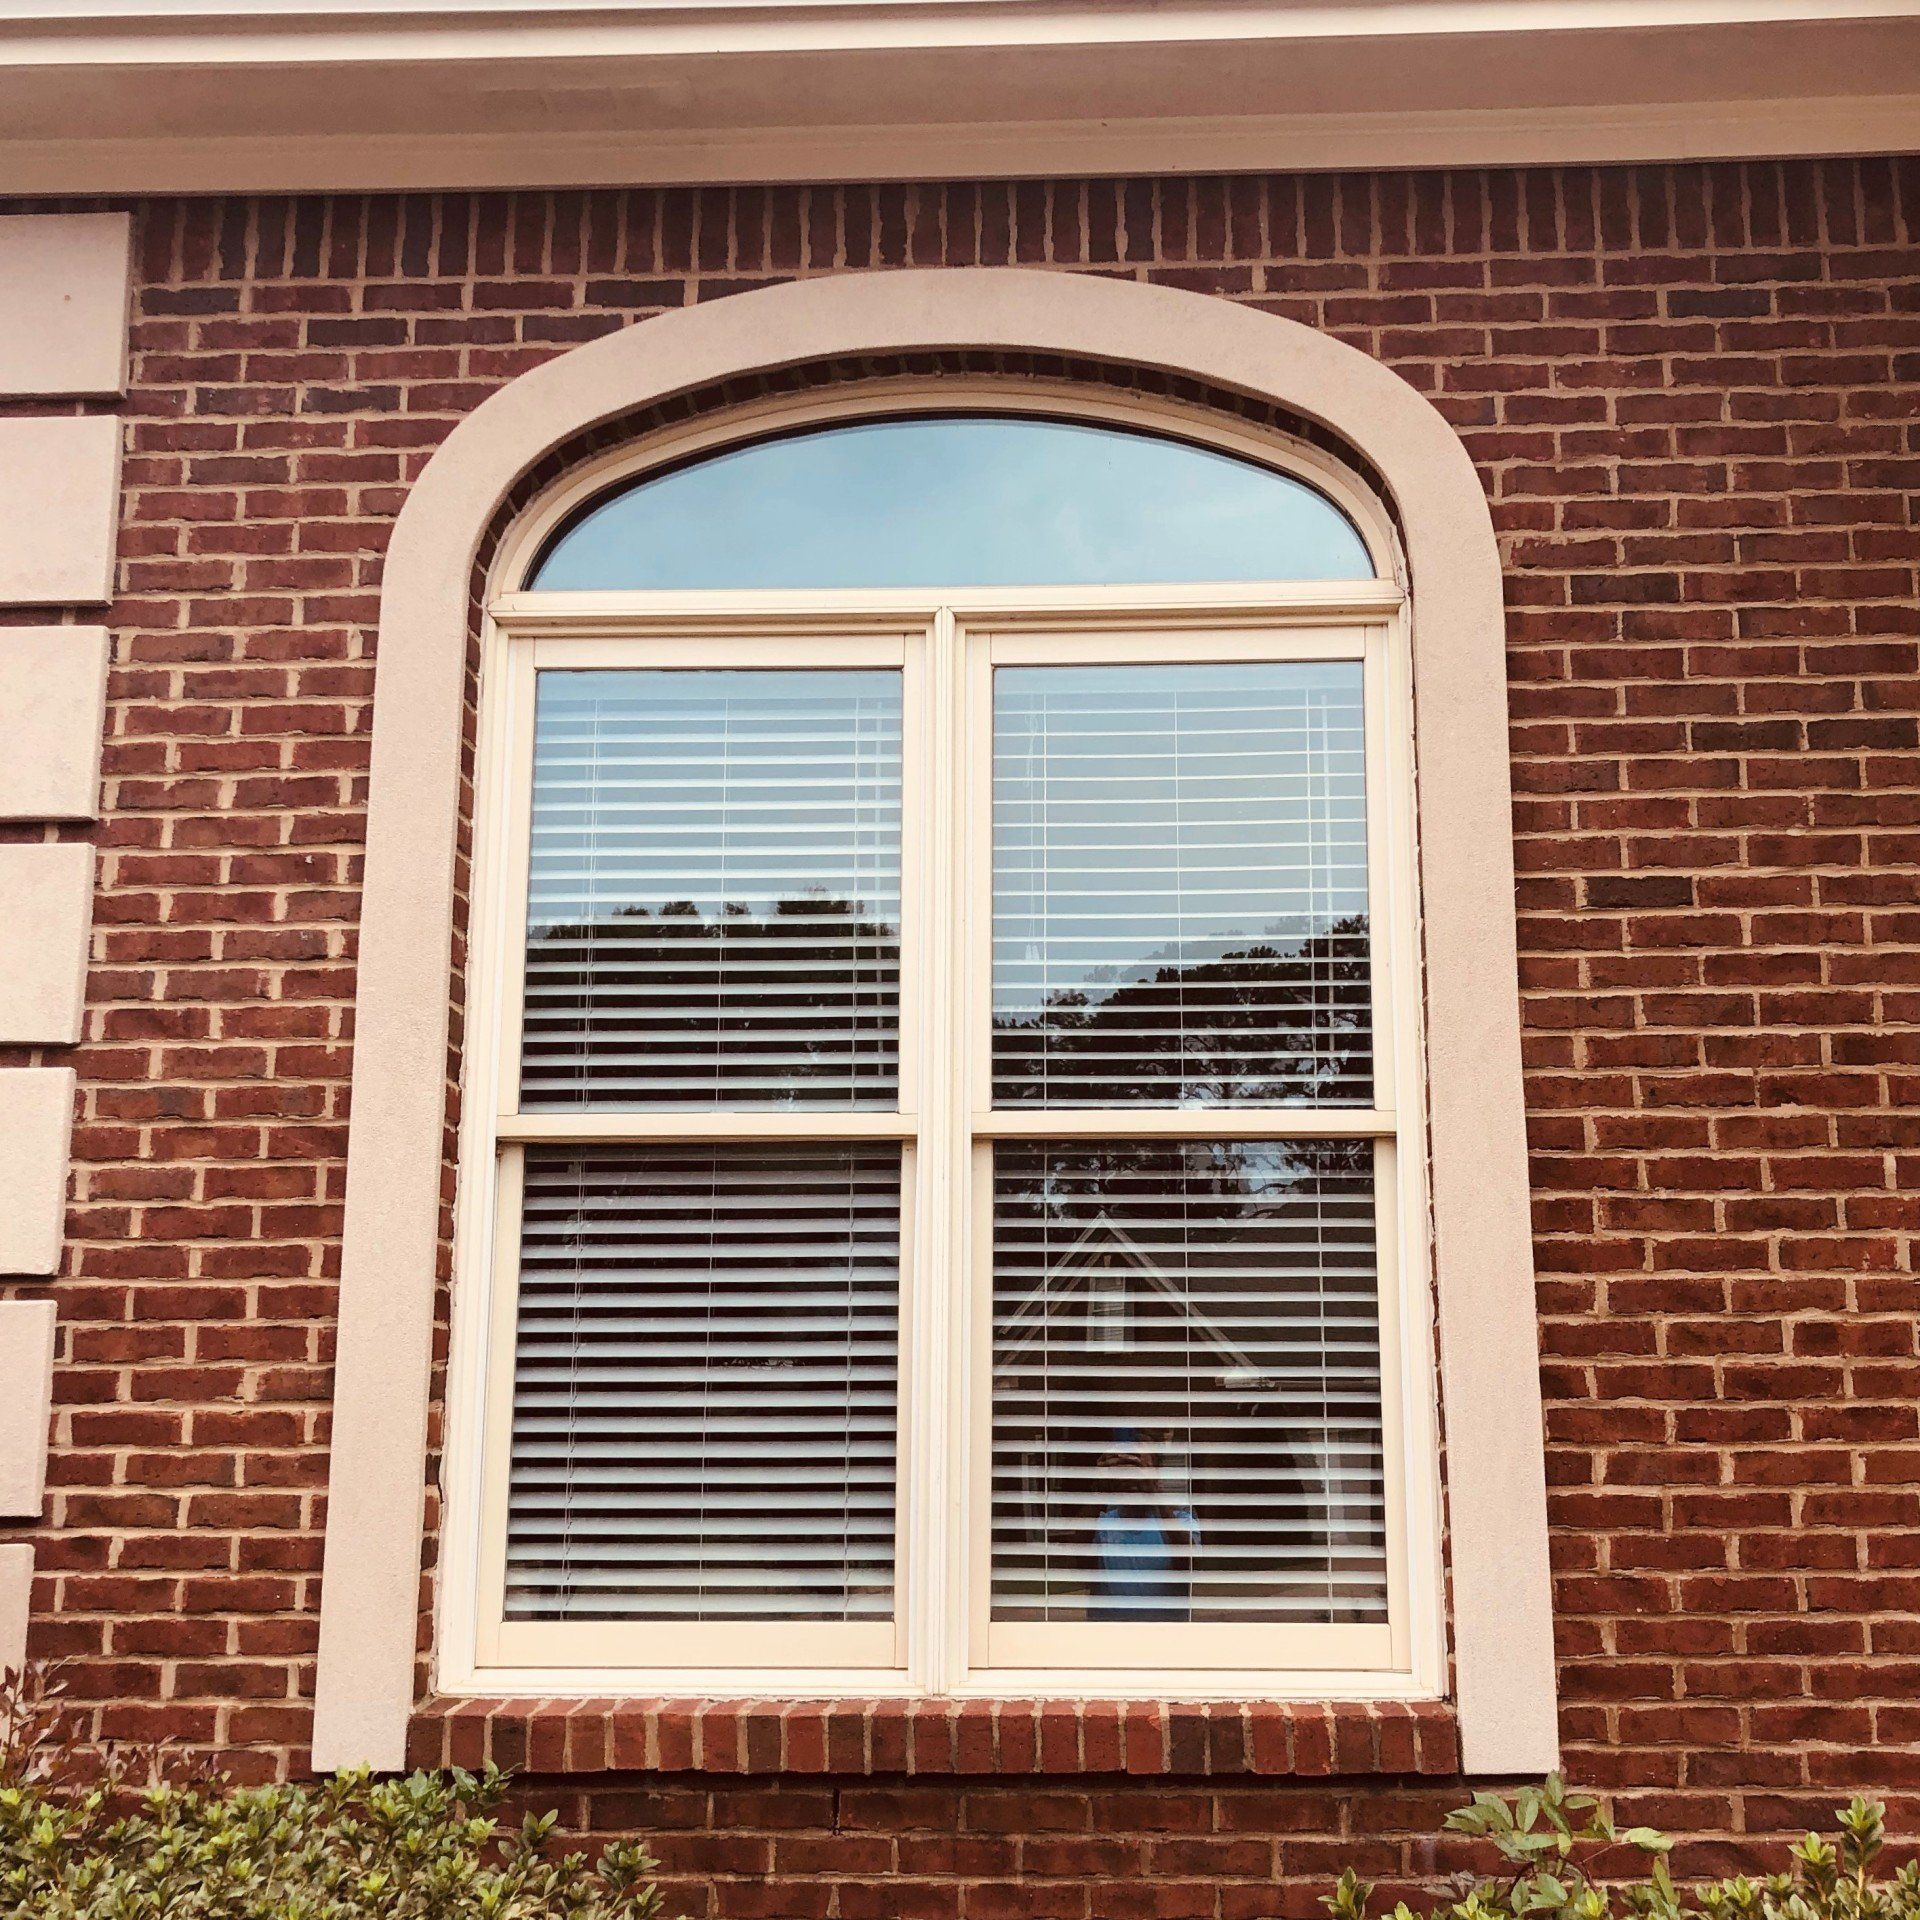 house window tinting in Montgomery AL - Before useless generic tint was removed from this home's windows in Montgomery, AL